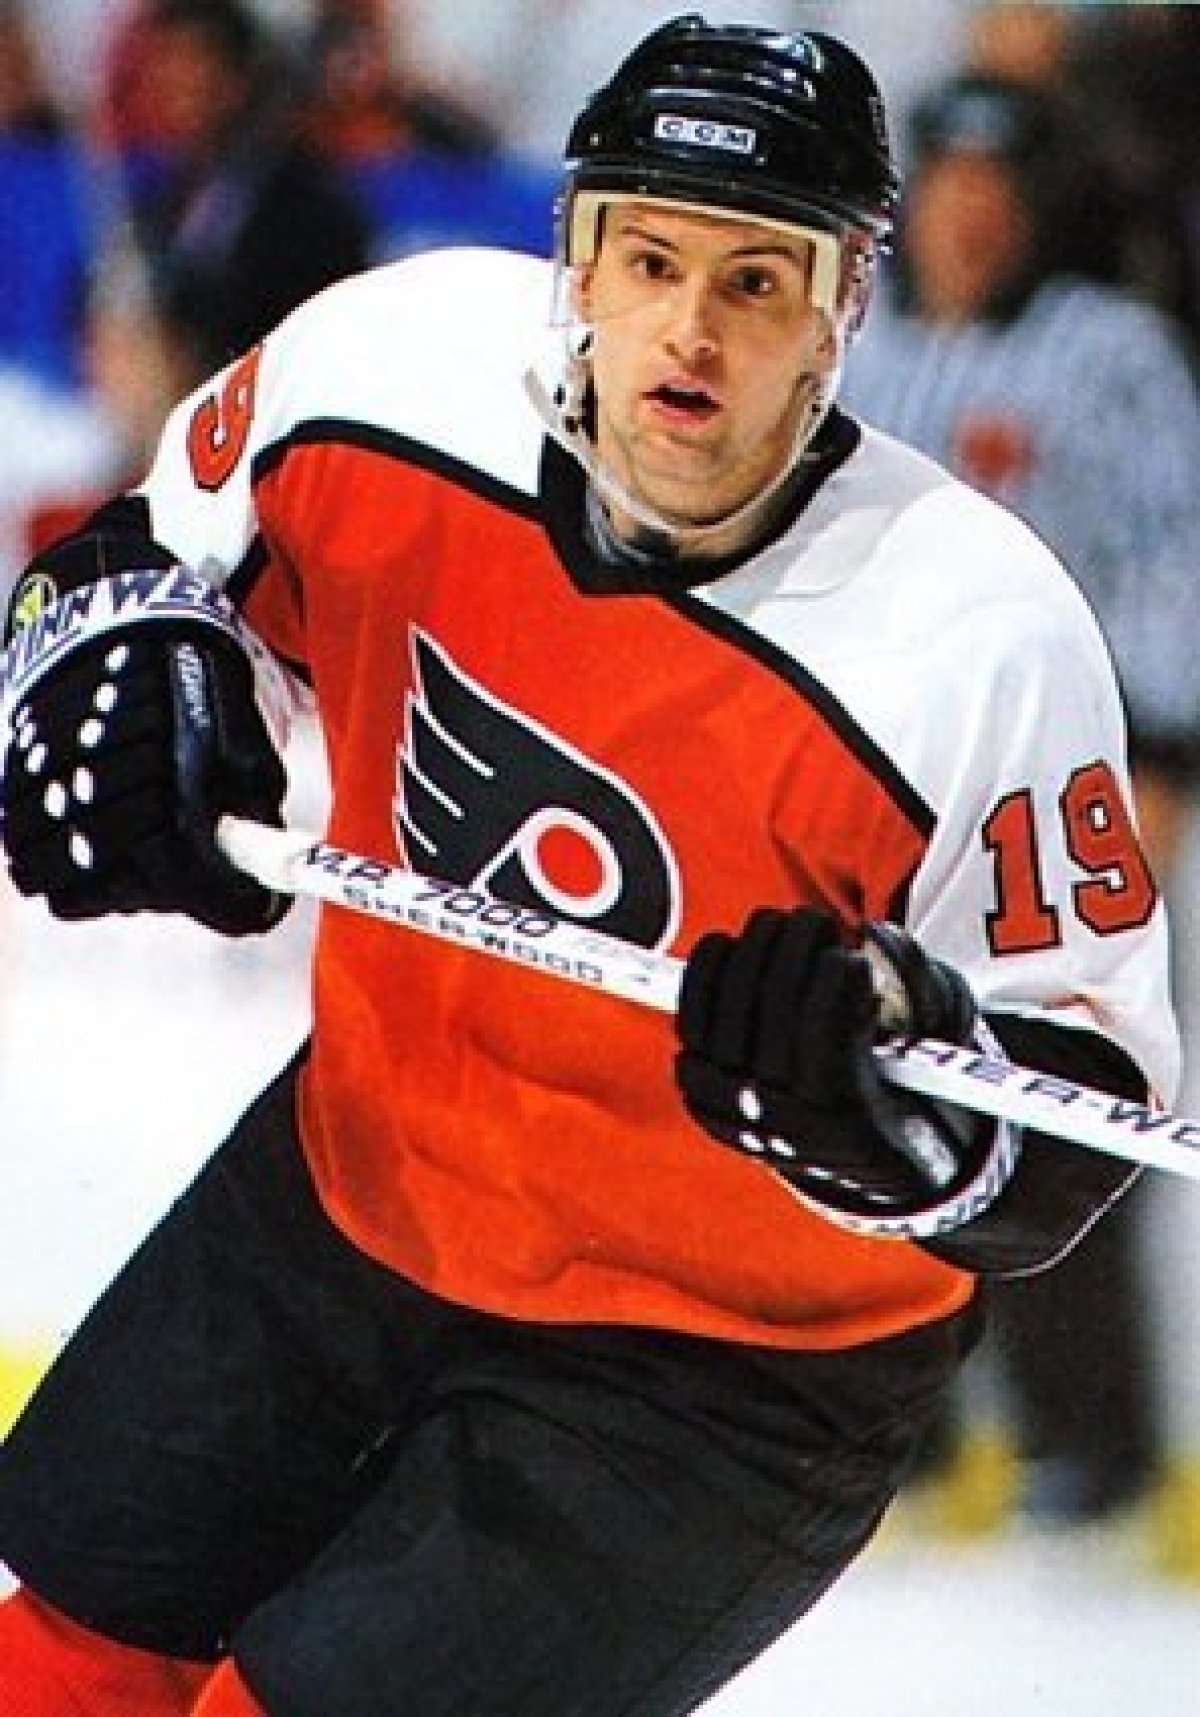 Not in Hall of Fame - 35. Dave Poulin